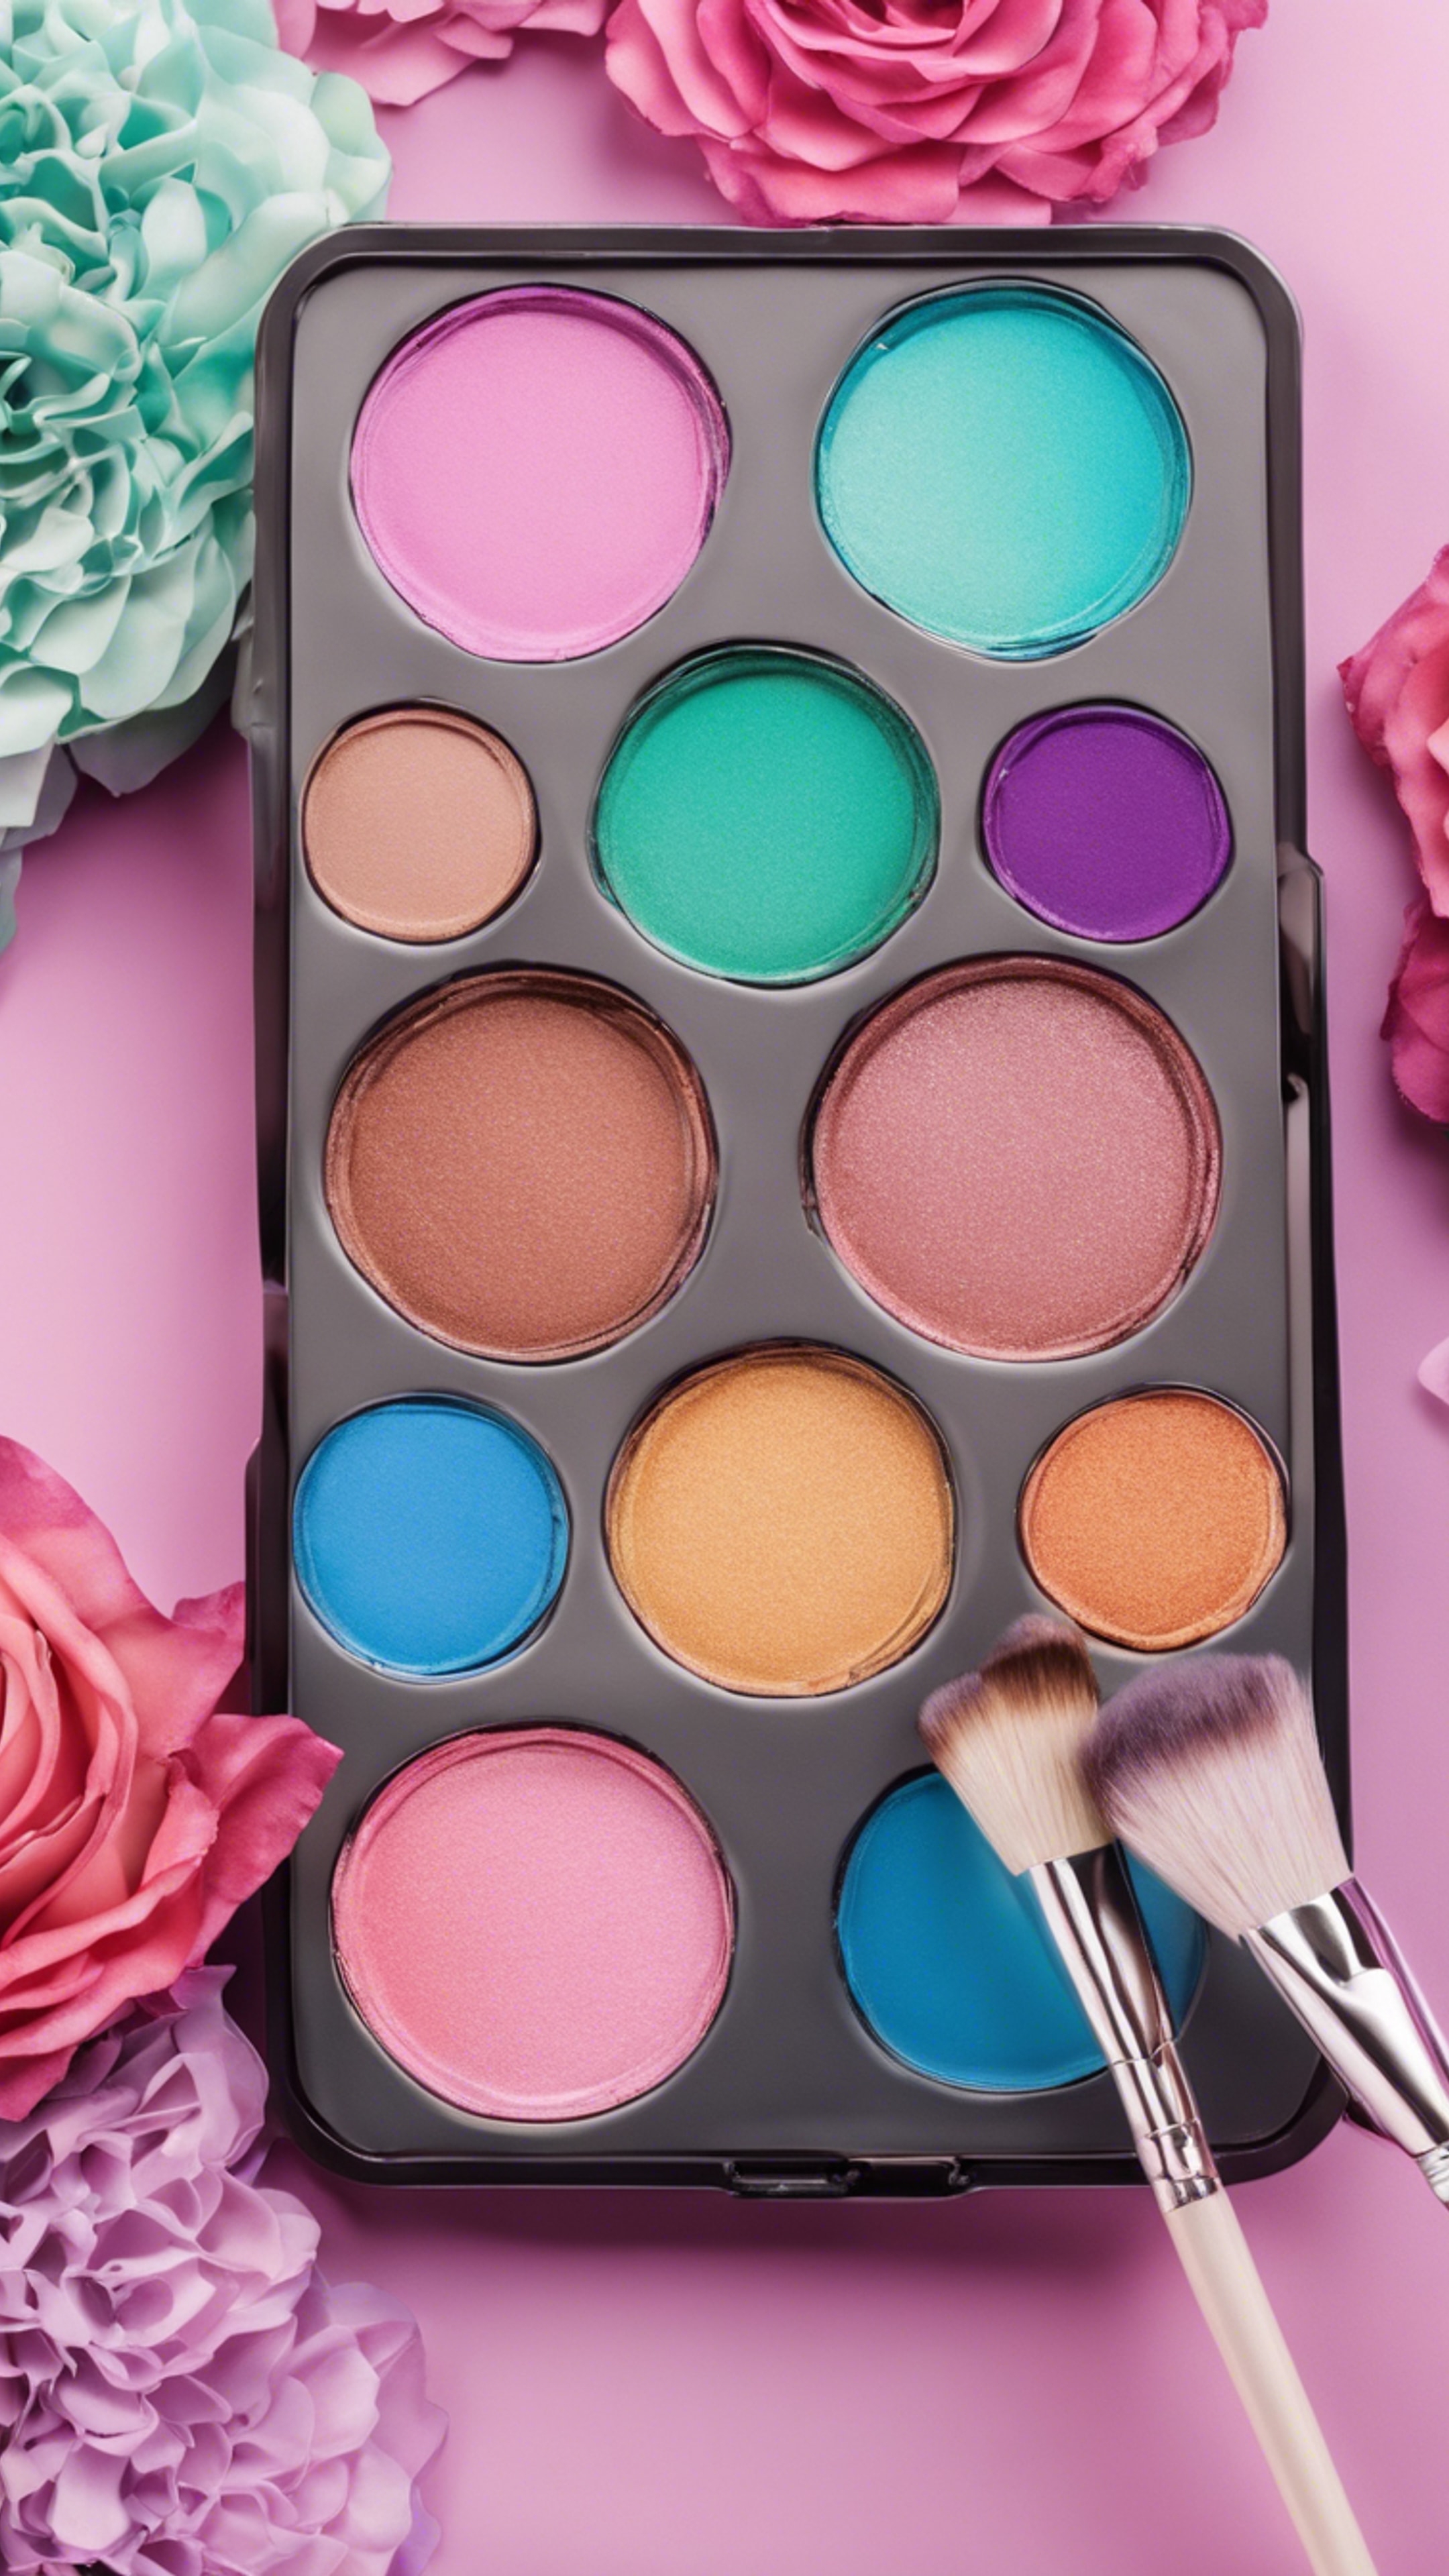 A cute girly makeup palette with a variety of vibrant colors and a brush for application. Taustakuva[6f3ccf3758d549978770]